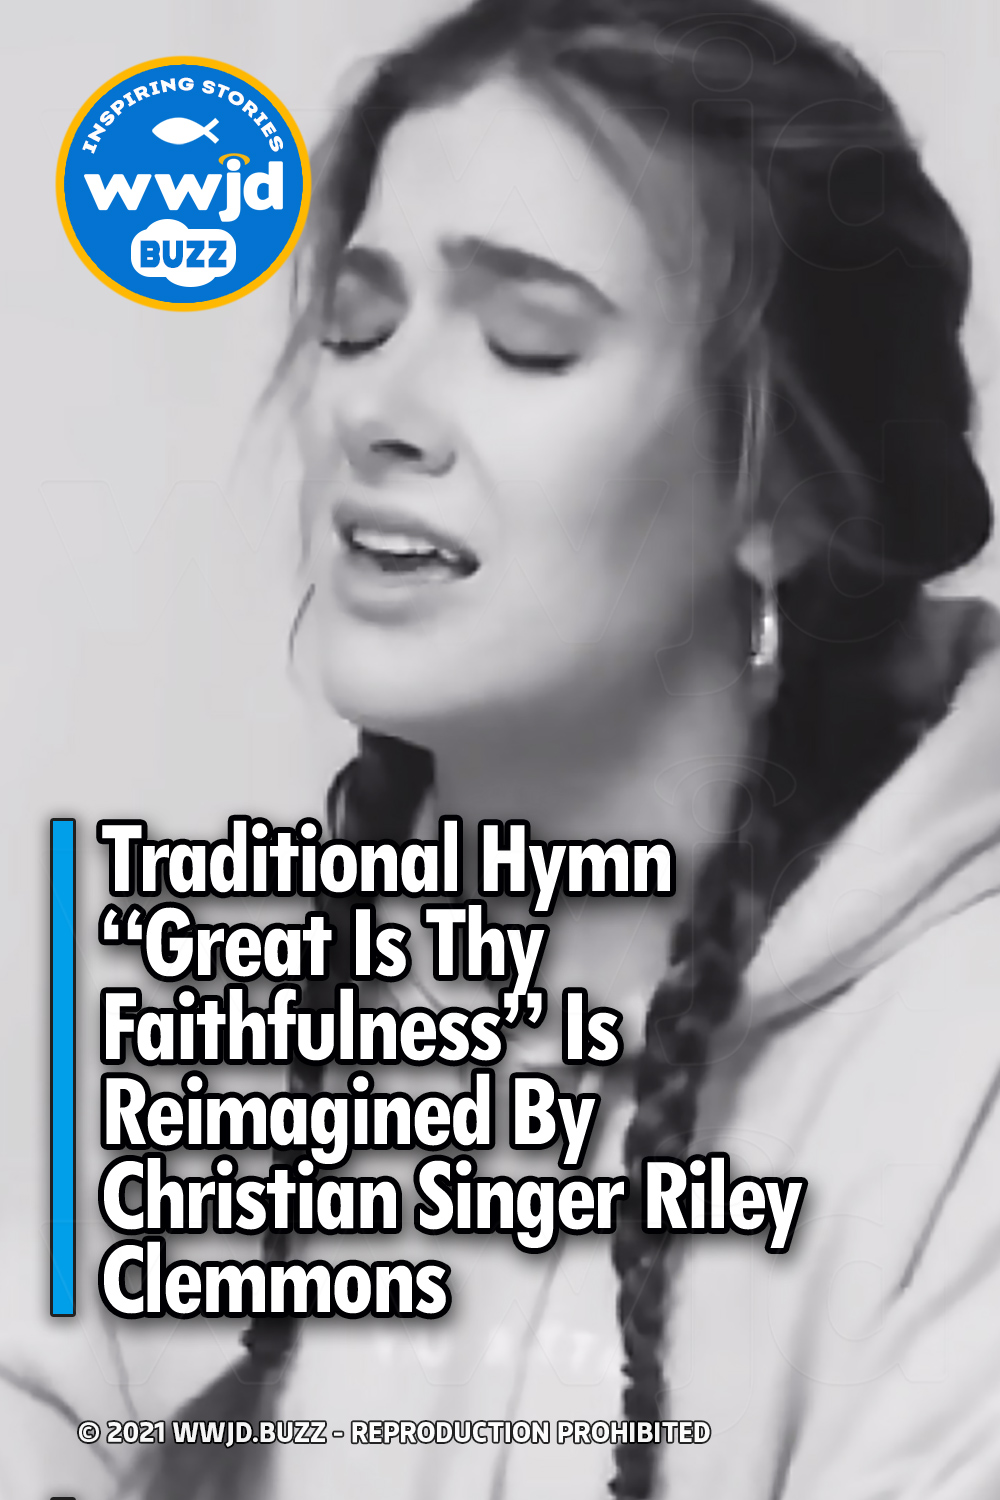 Traditional Hymn “Great Is Thy Faithfulness” Is Reimagined By Christian Singer Riley Clemmons